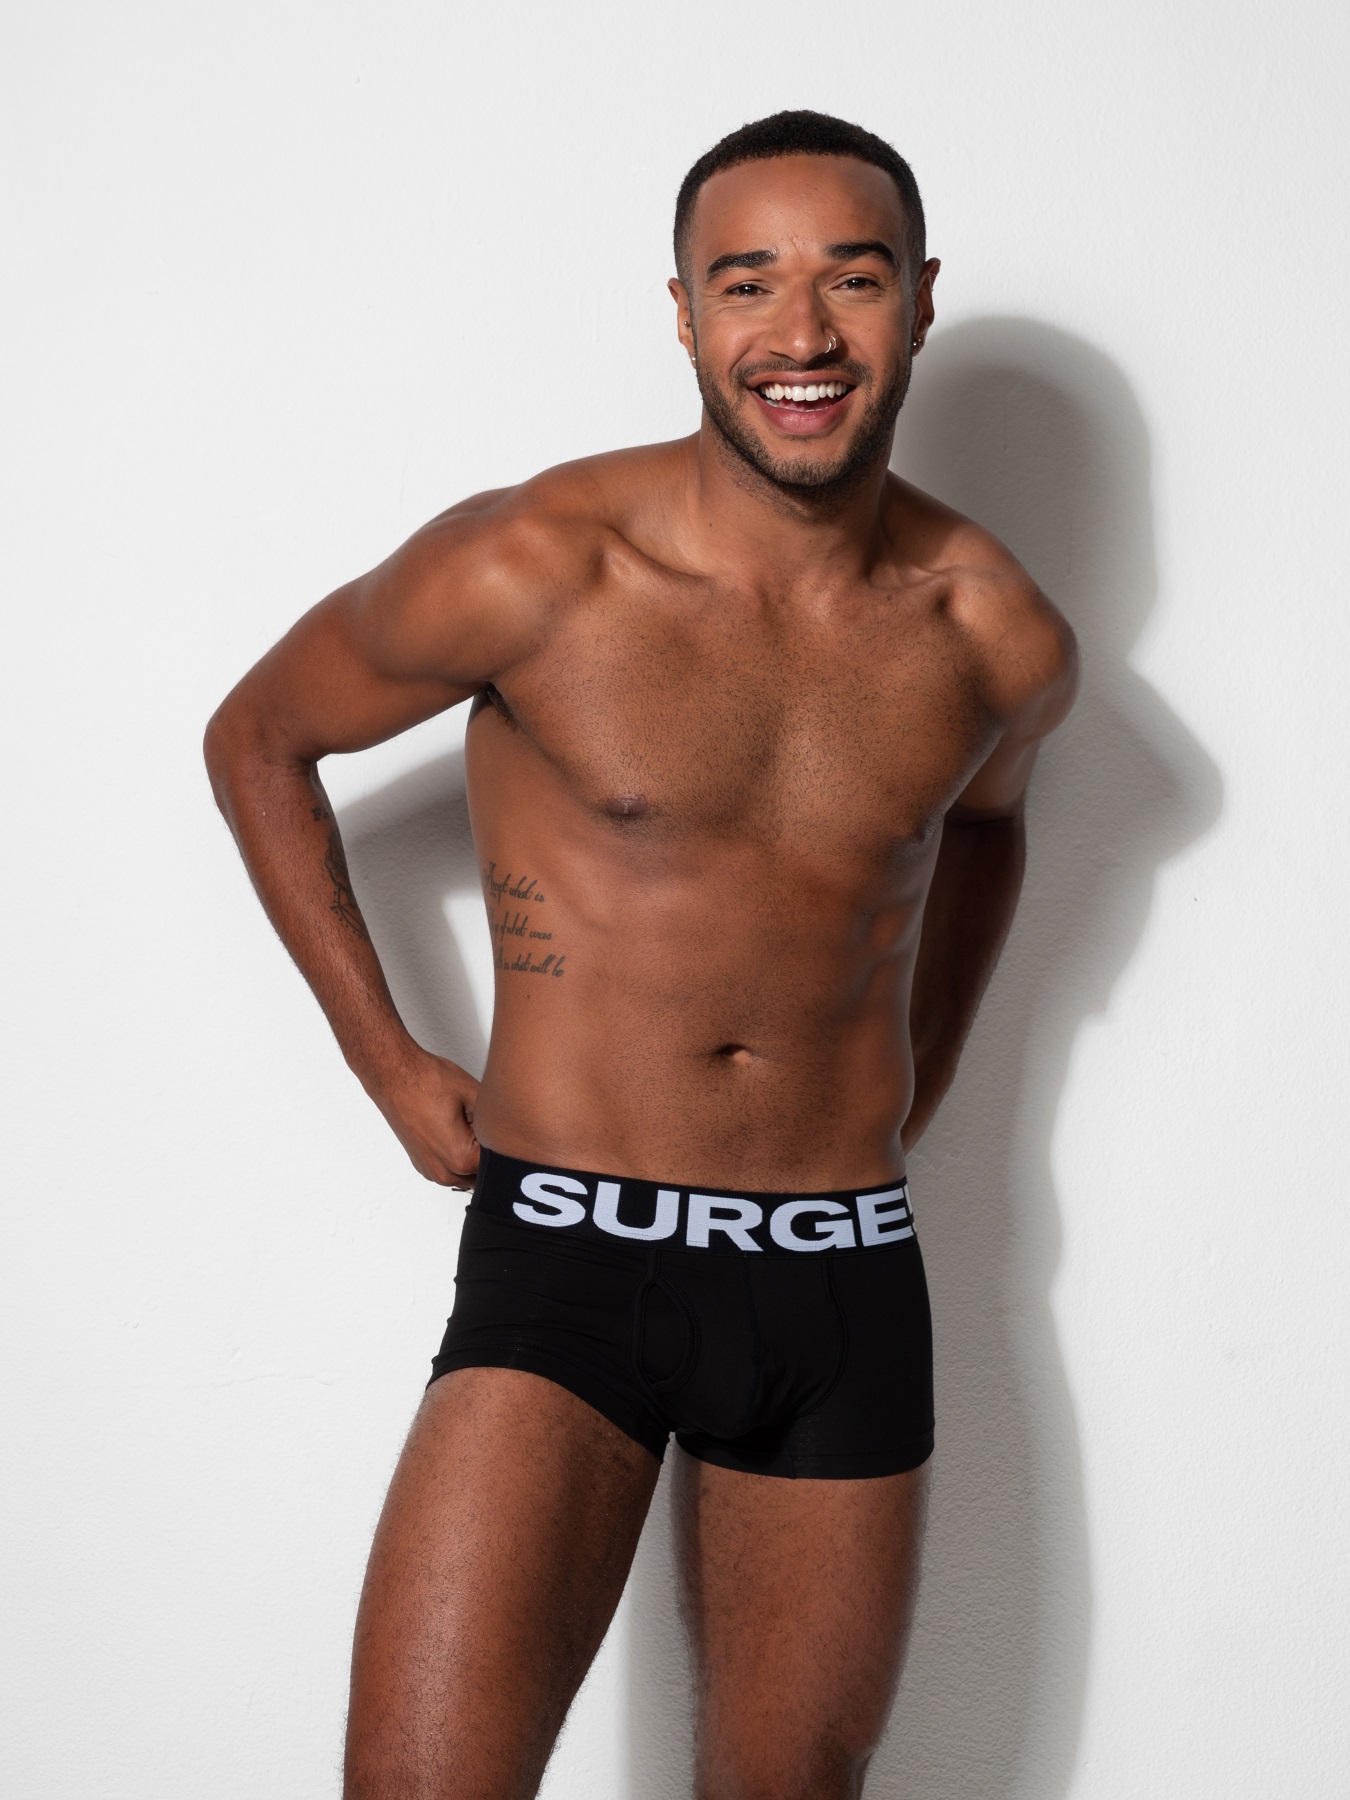 New underwear brand Surge says 'pants' to male body image issues and uses  models of all shapes and sizes